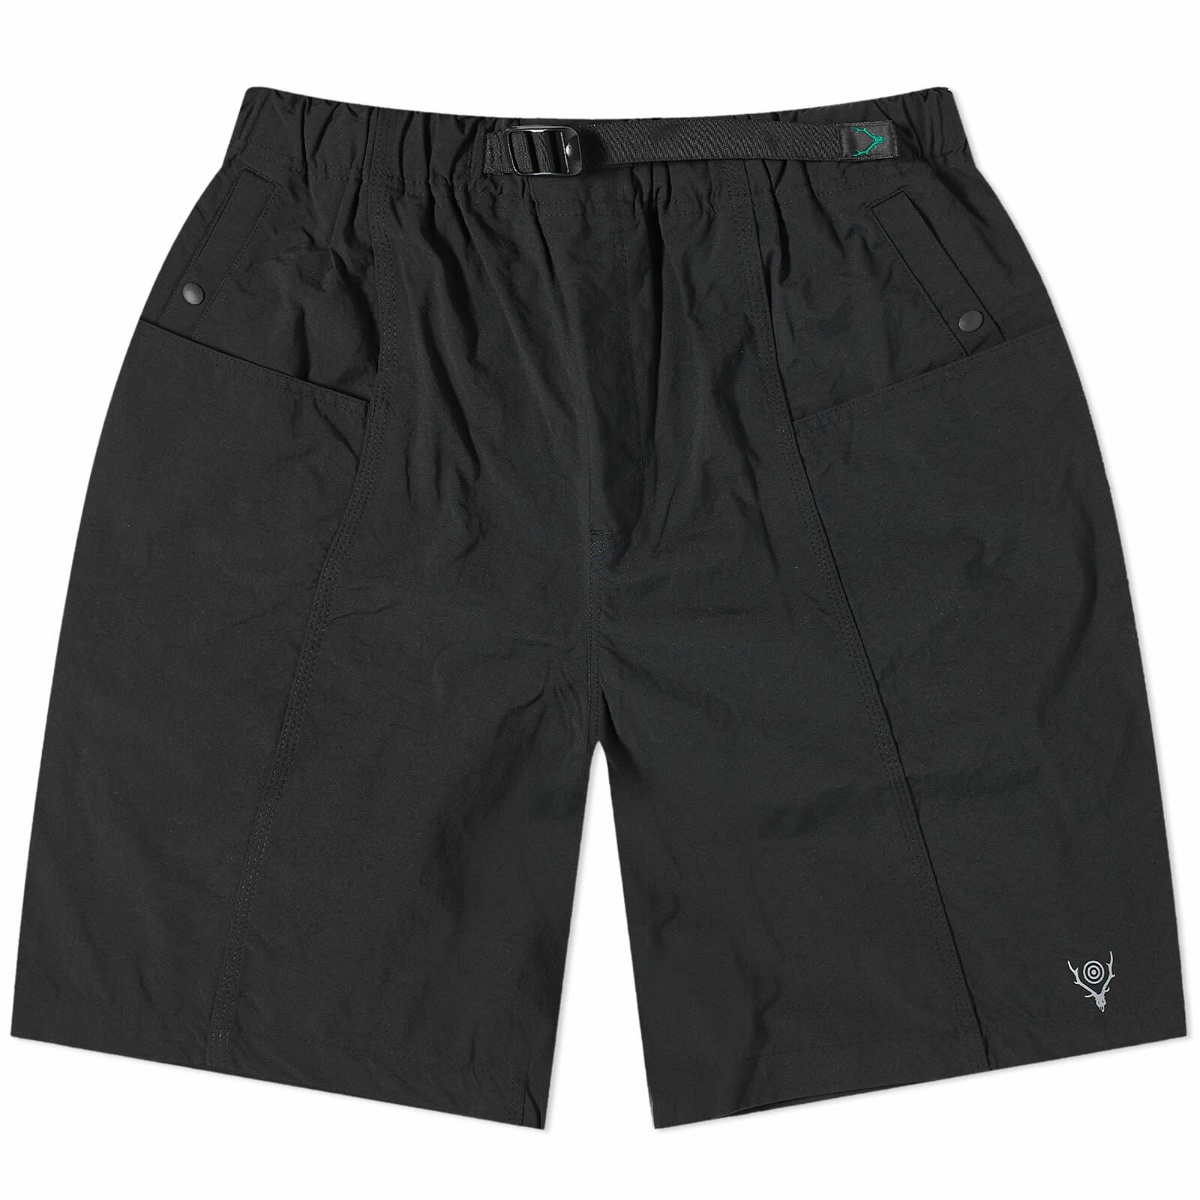 South2 West8 Men's Belted C.S. Nylon Shorts in Black South2 West8